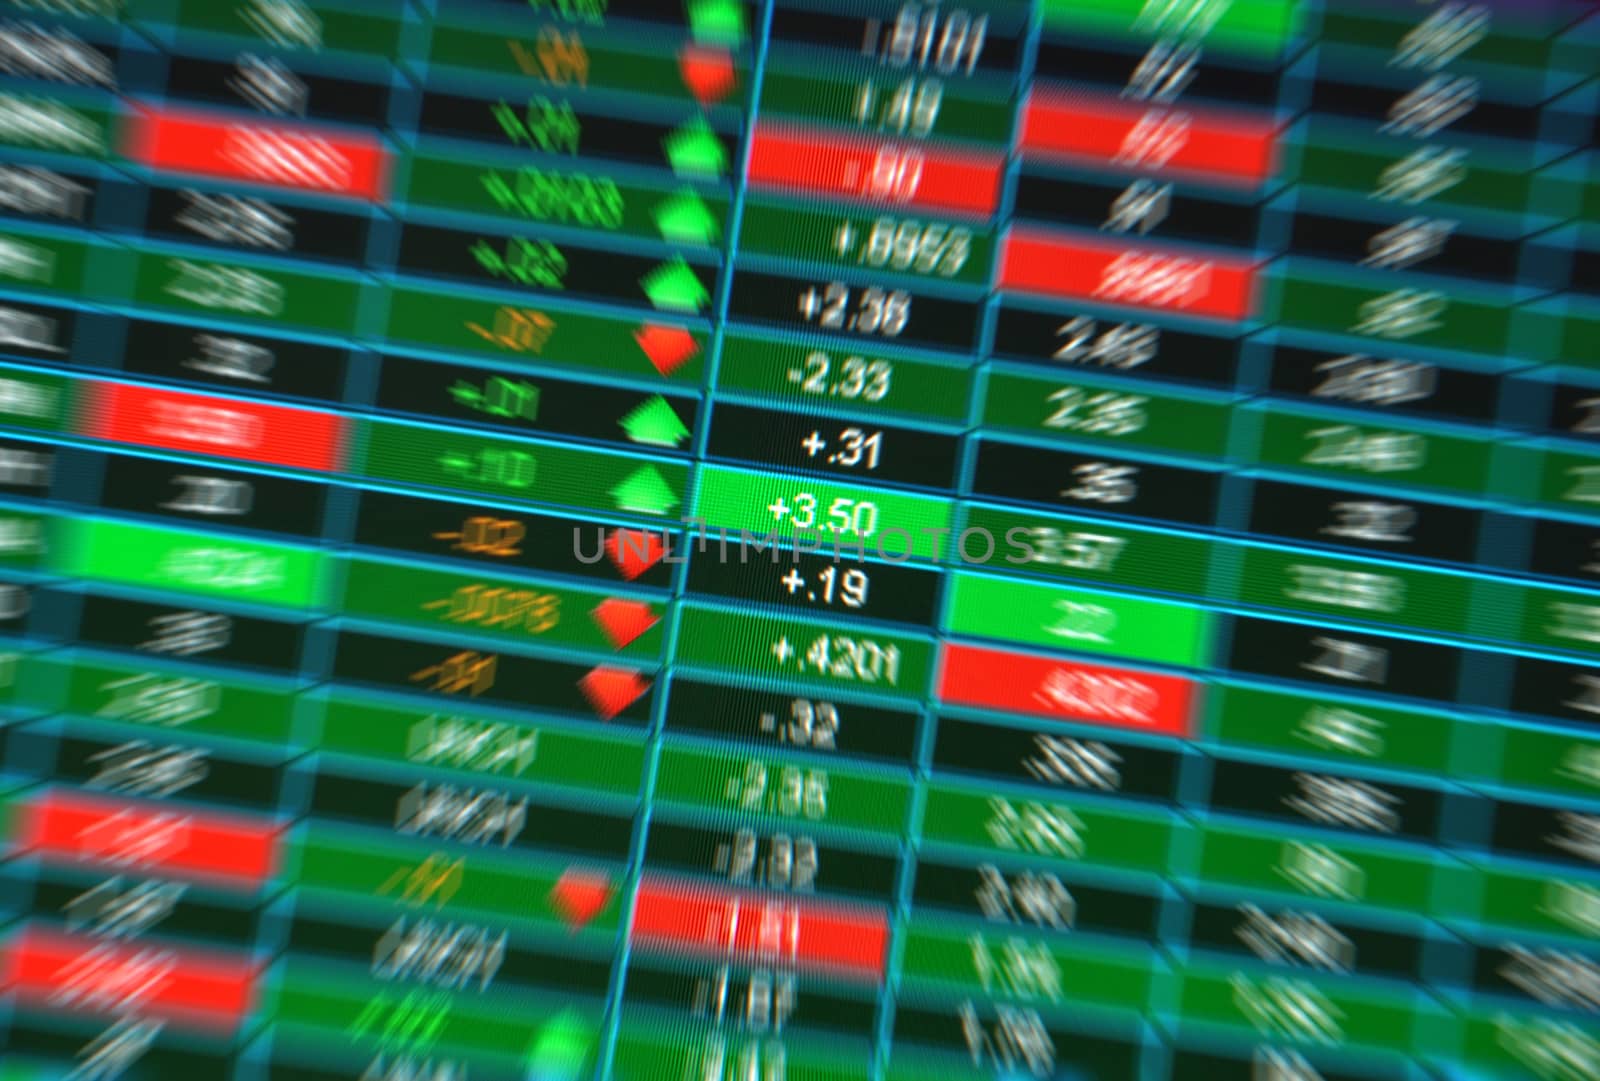 Stock market quotes from a computer screen. Blur with focus on center. Concept for fast paced market